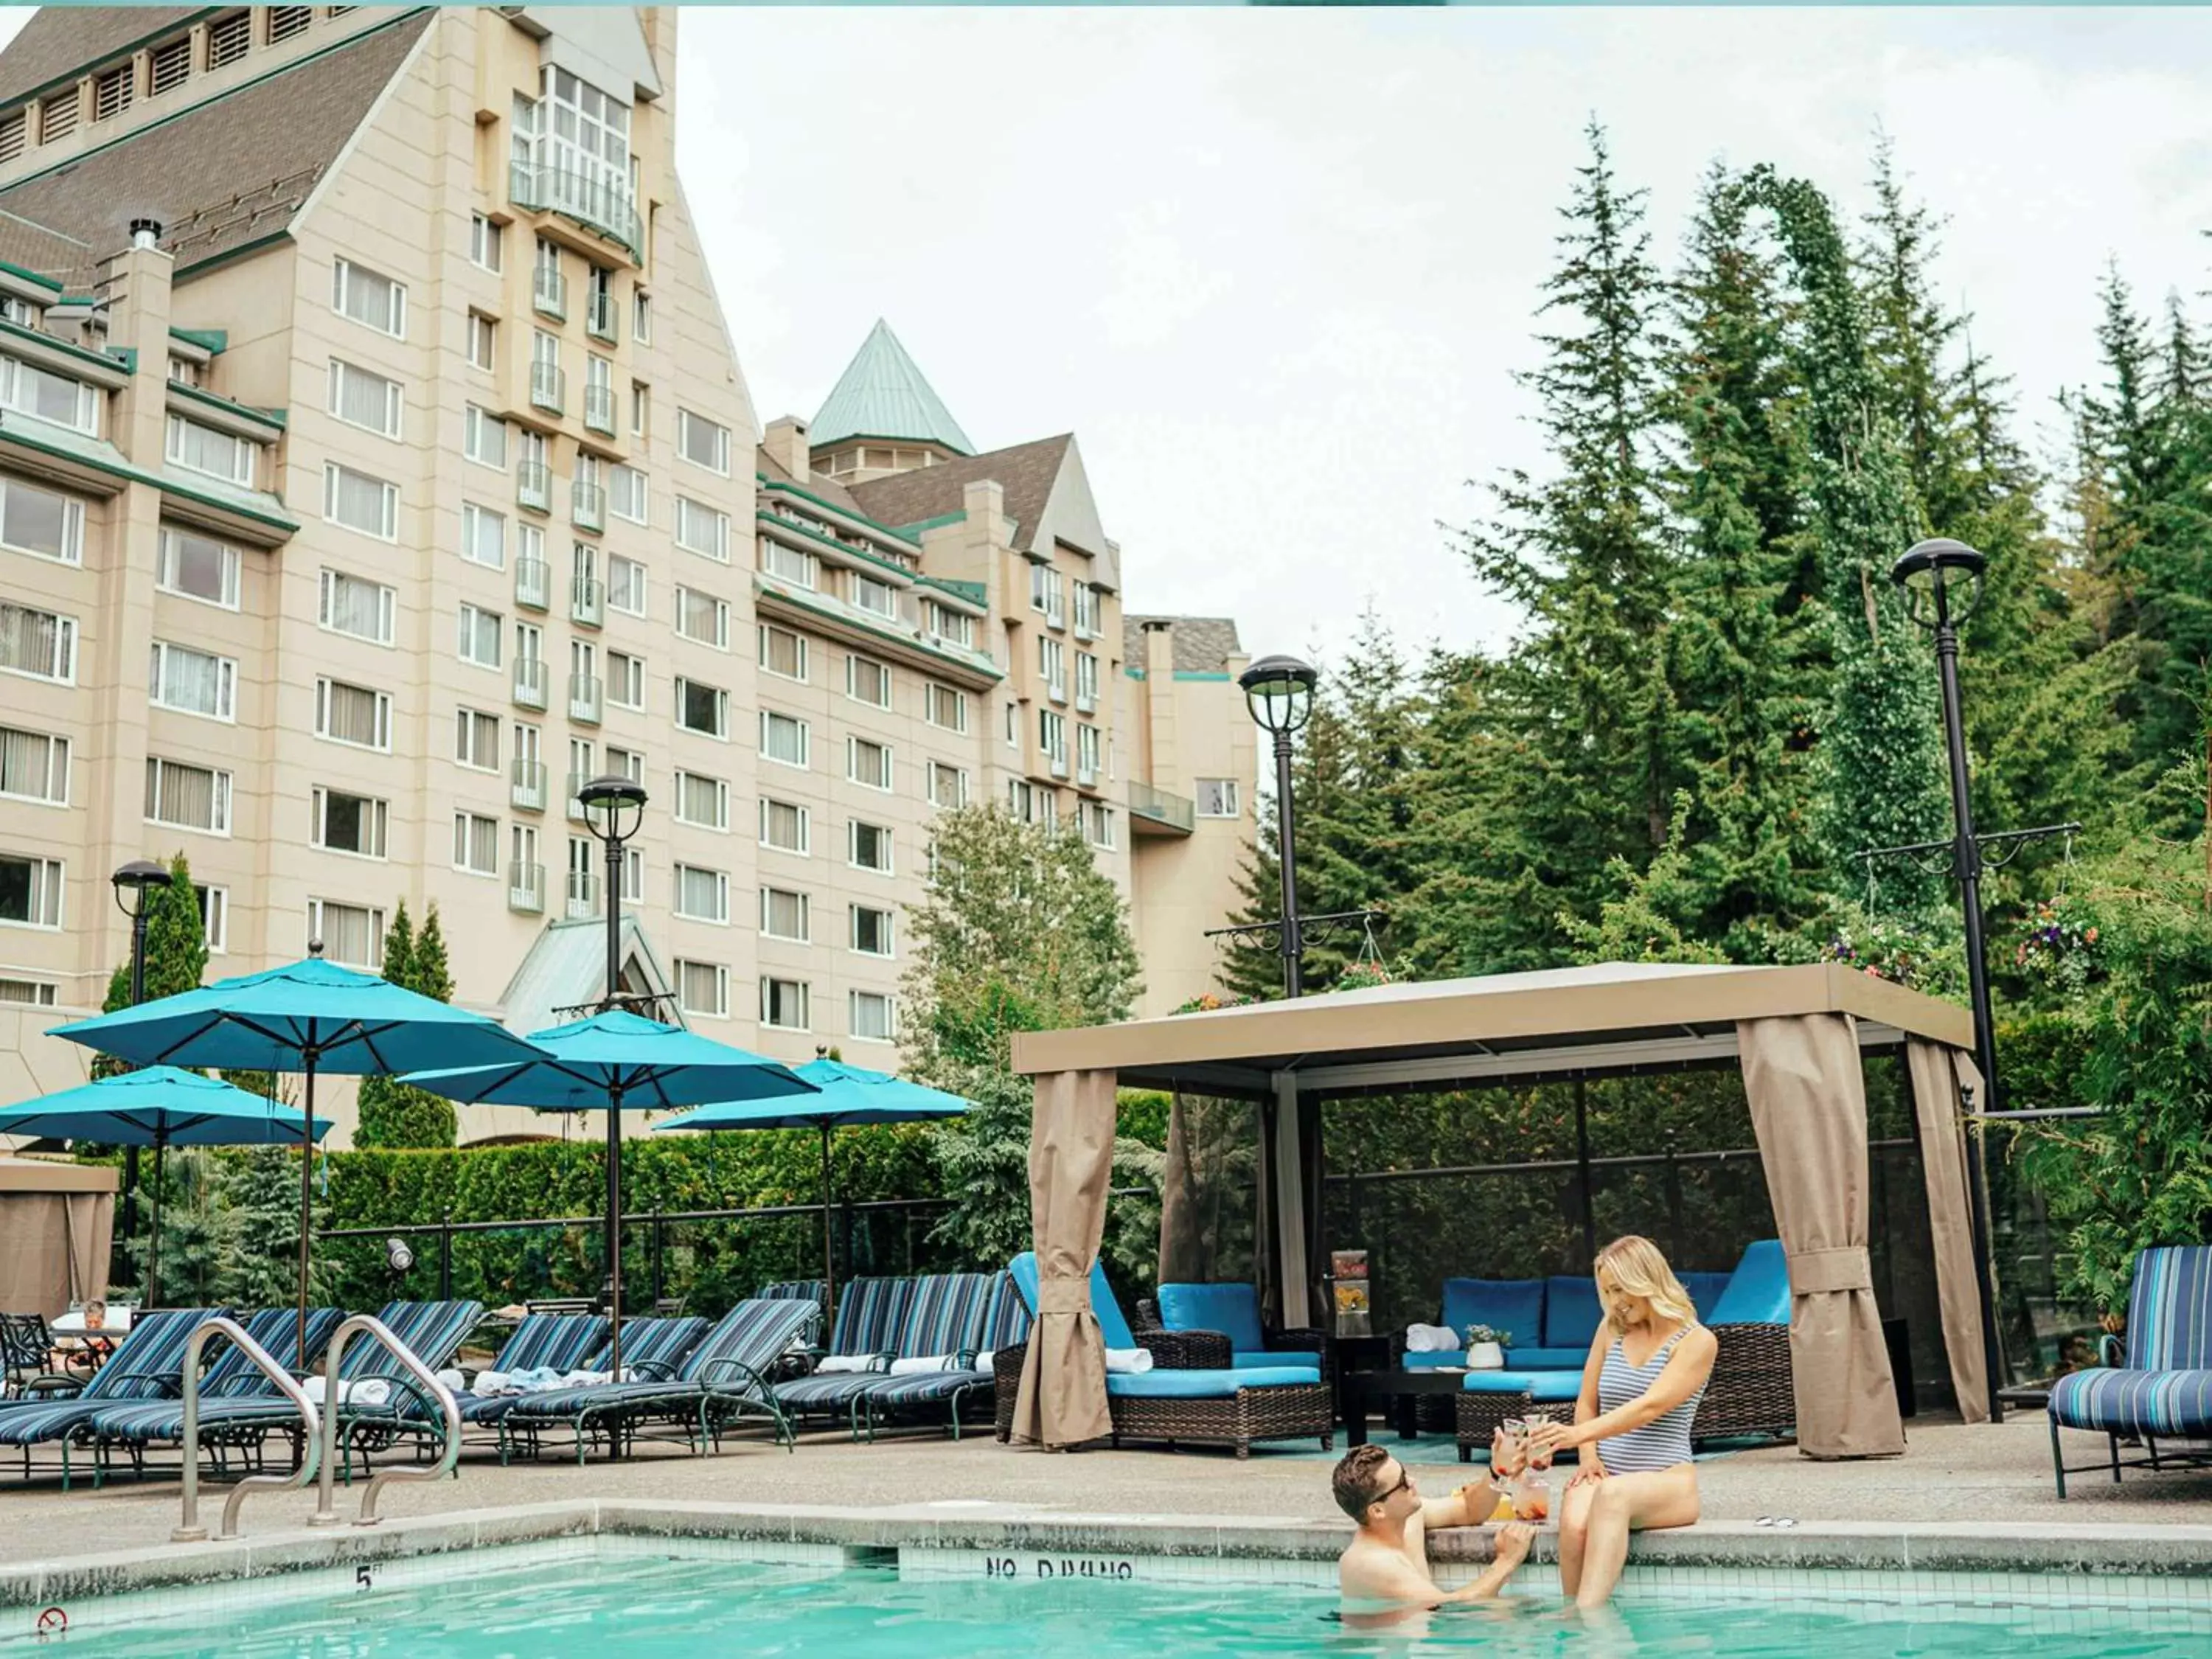 Activities in Fairmont Chateau Whistler